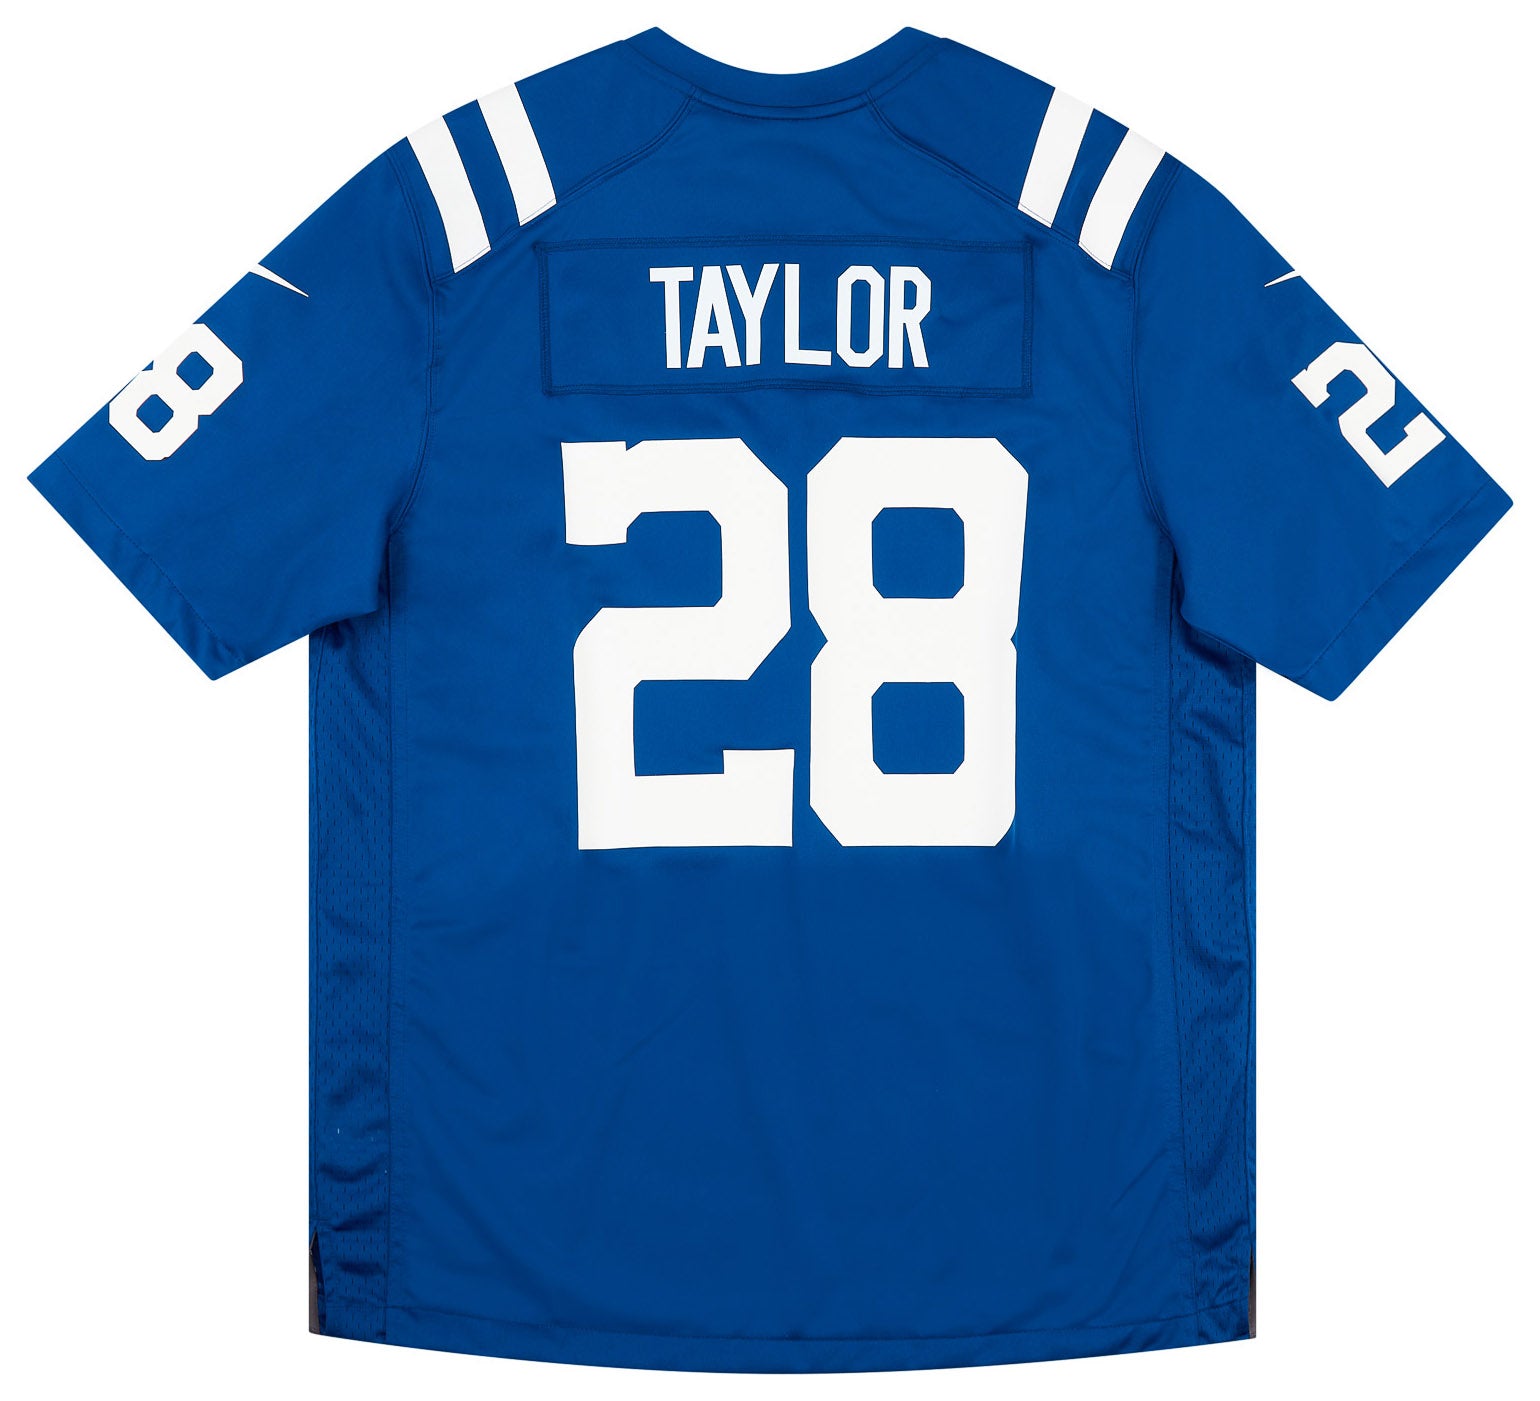 2020-22 INDIANAPOLIS COLTS TAYLOR #28 NIKE GAME JERSEY (HOME) L - W/TAGS